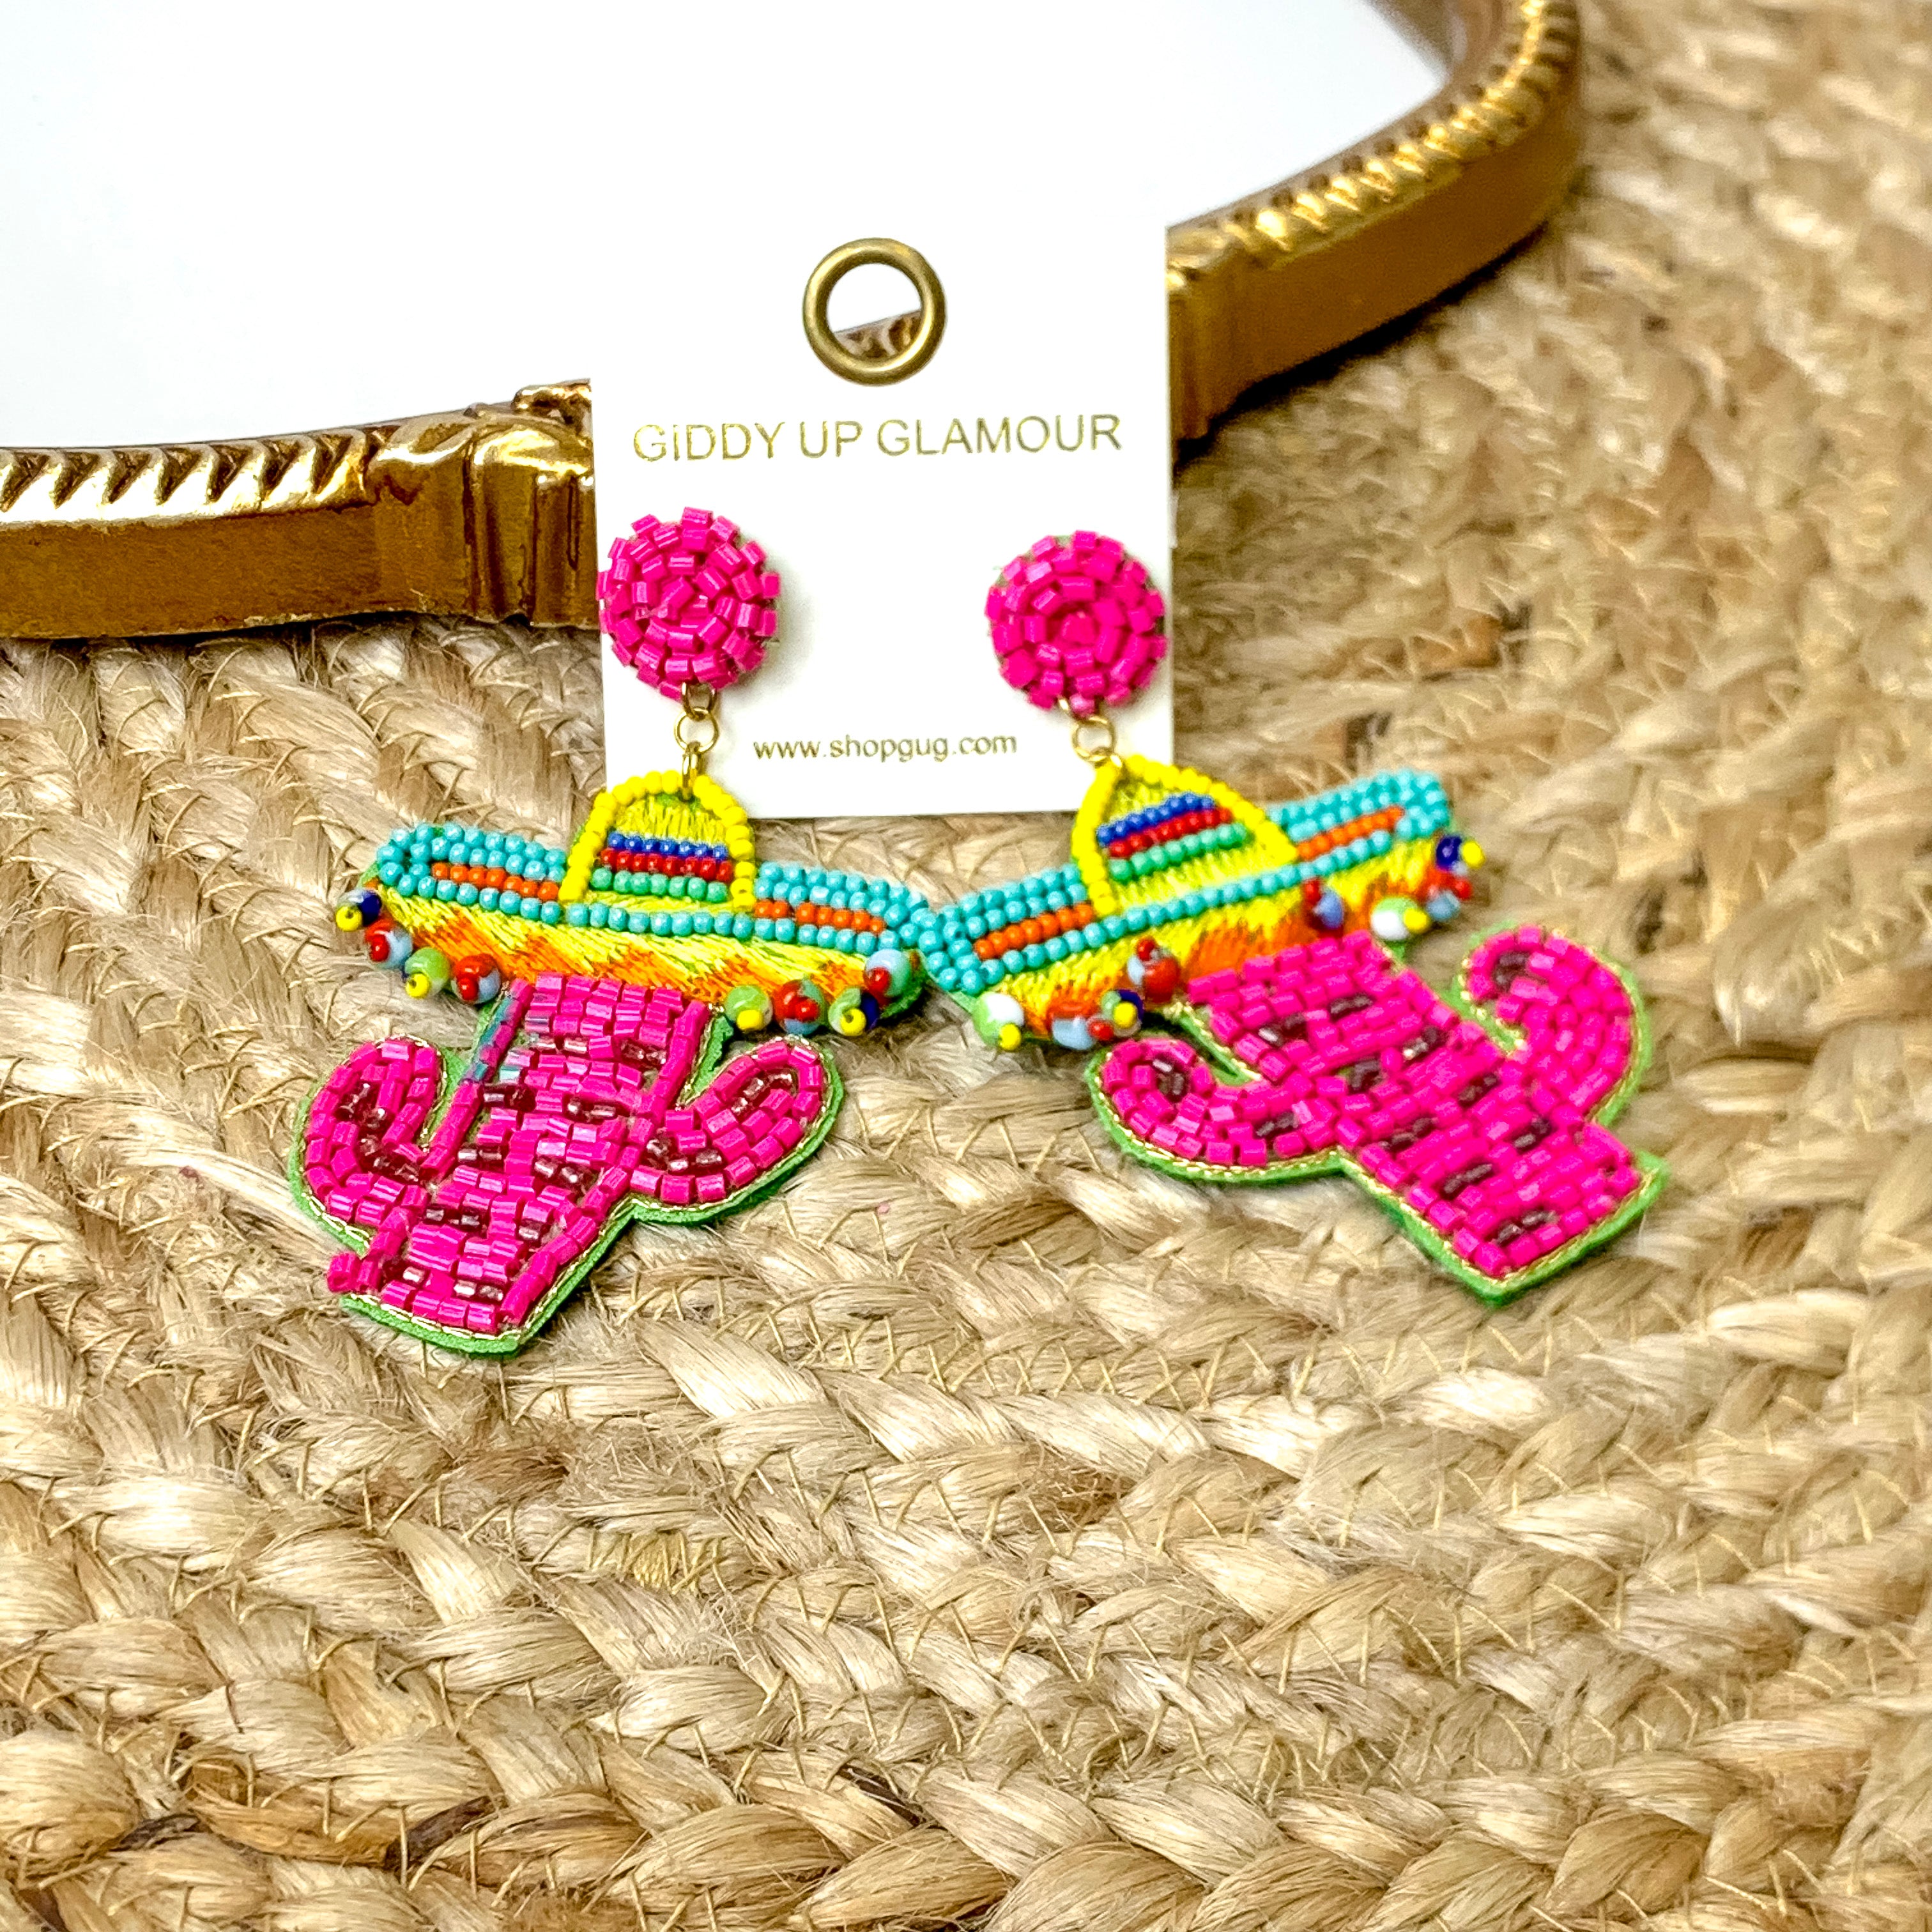 Beaded Cactus Earrings with a Sombrero in Pink - Giddy Up Glamour Boutique